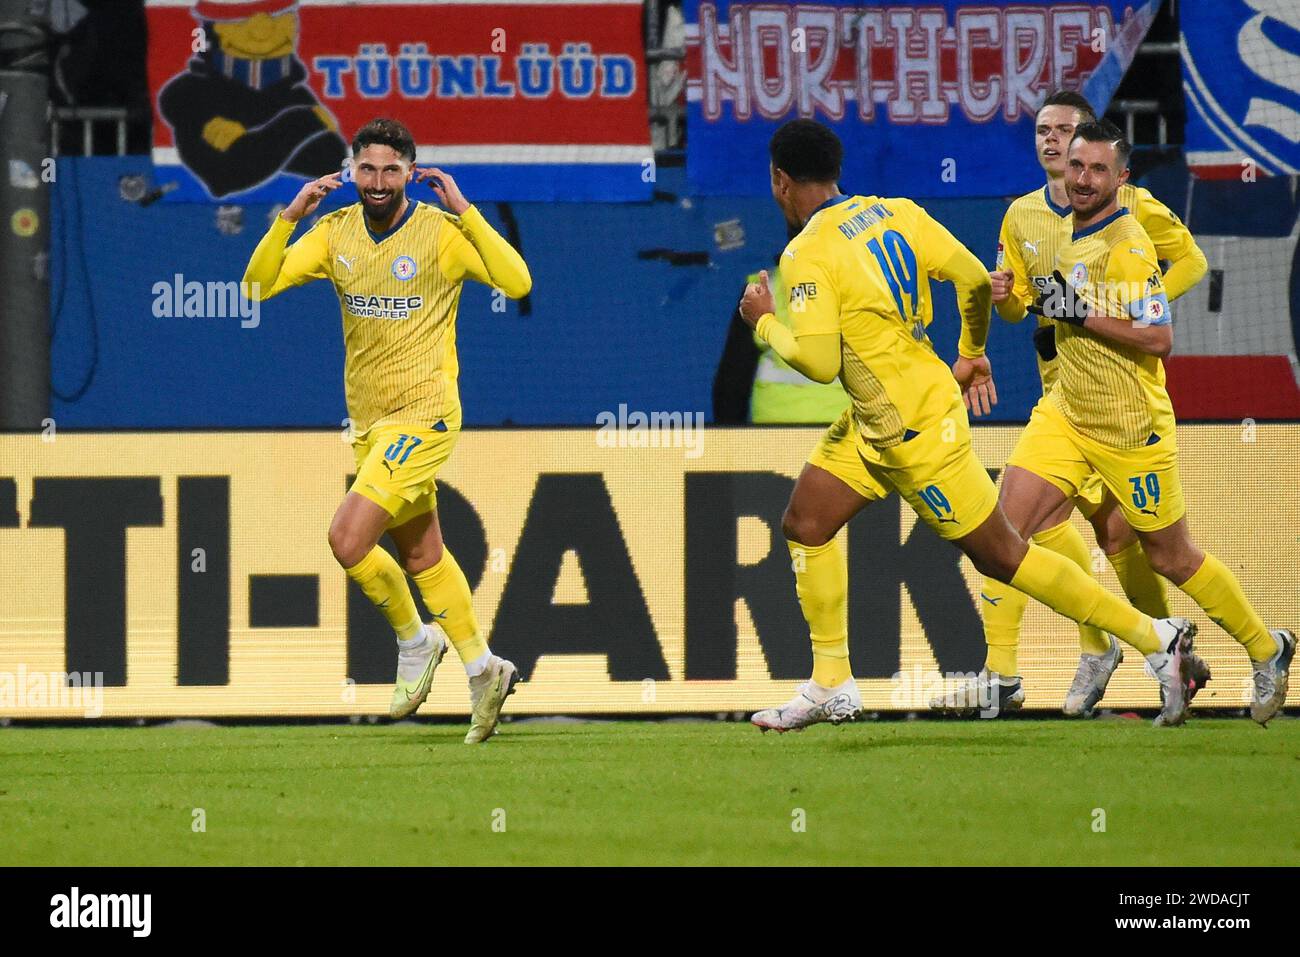 Kiel, Germany. 19th Jan, 2024. Soccer: Bundesliga 2, Holstein Kiel - Eintracht Braunschweig, Matchday 18, Holstein Stadium. Braunschweig players celebrate after Fabio Kaufmann (l) scores to make it 1-1. Credit: Gregor Fischer/dpa - IMPORTANT NOTE: In accordance with the regulations of the DFL German Football League and the DFB German Football Association, it is prohibited to utilize or have utilized photographs taken in the stadium and/or of the match in the form of sequential images and/or video-like photo series./dpa/Alamy Live News Stock Photo